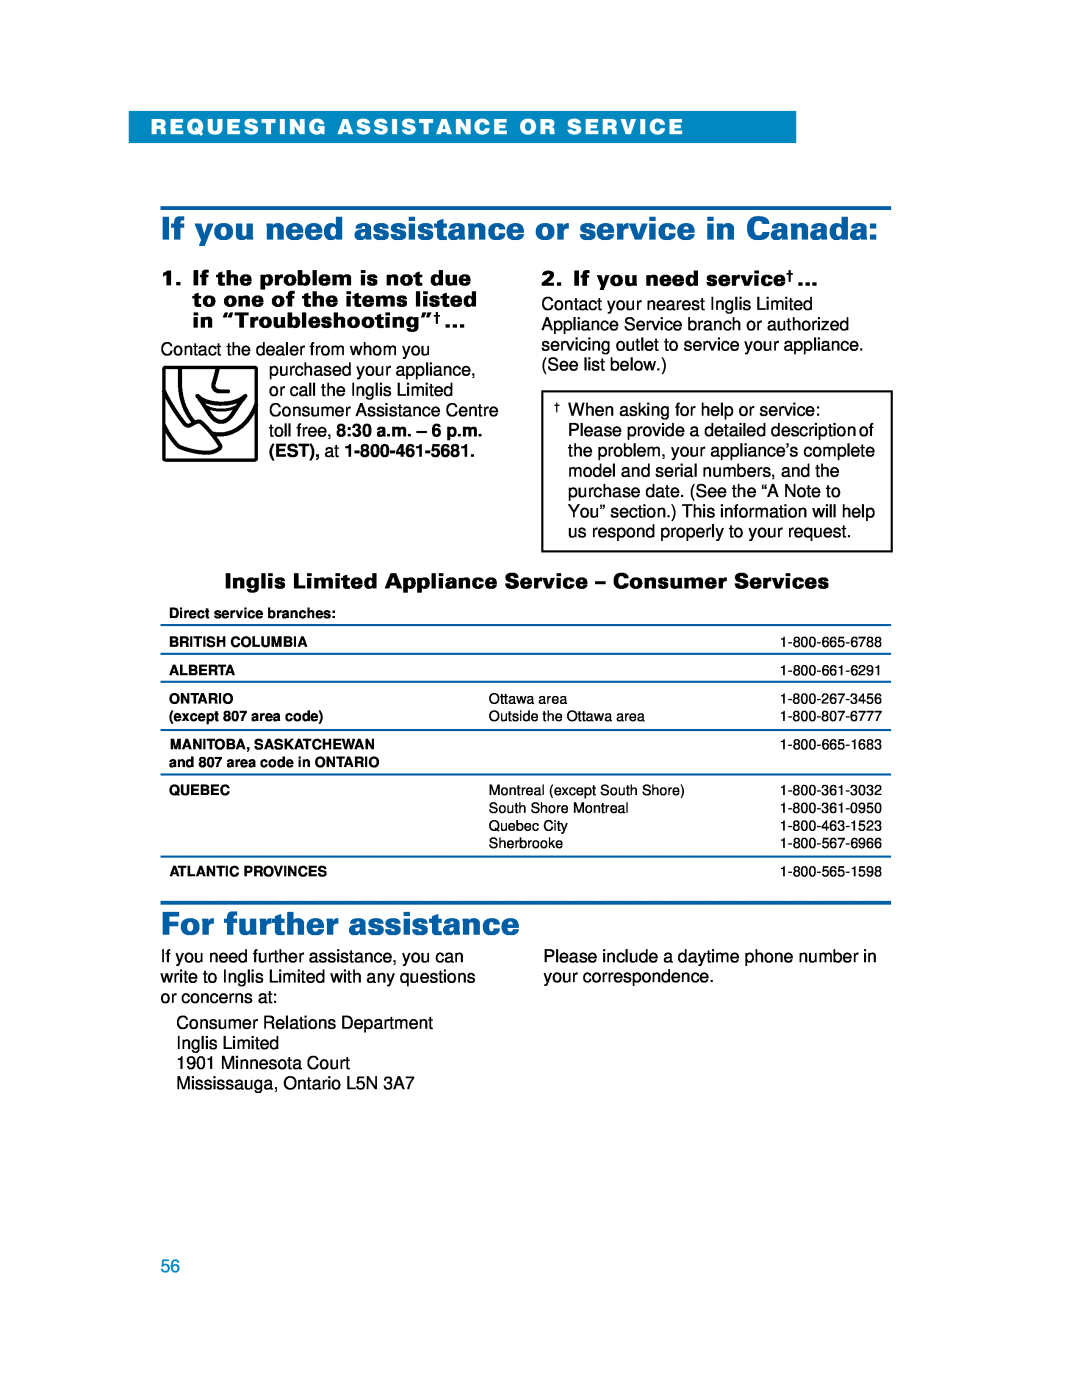 Whirlpool MH6130XE If you need assistance or service in Canada, For further assistance, Requesting Assistance Or Service 